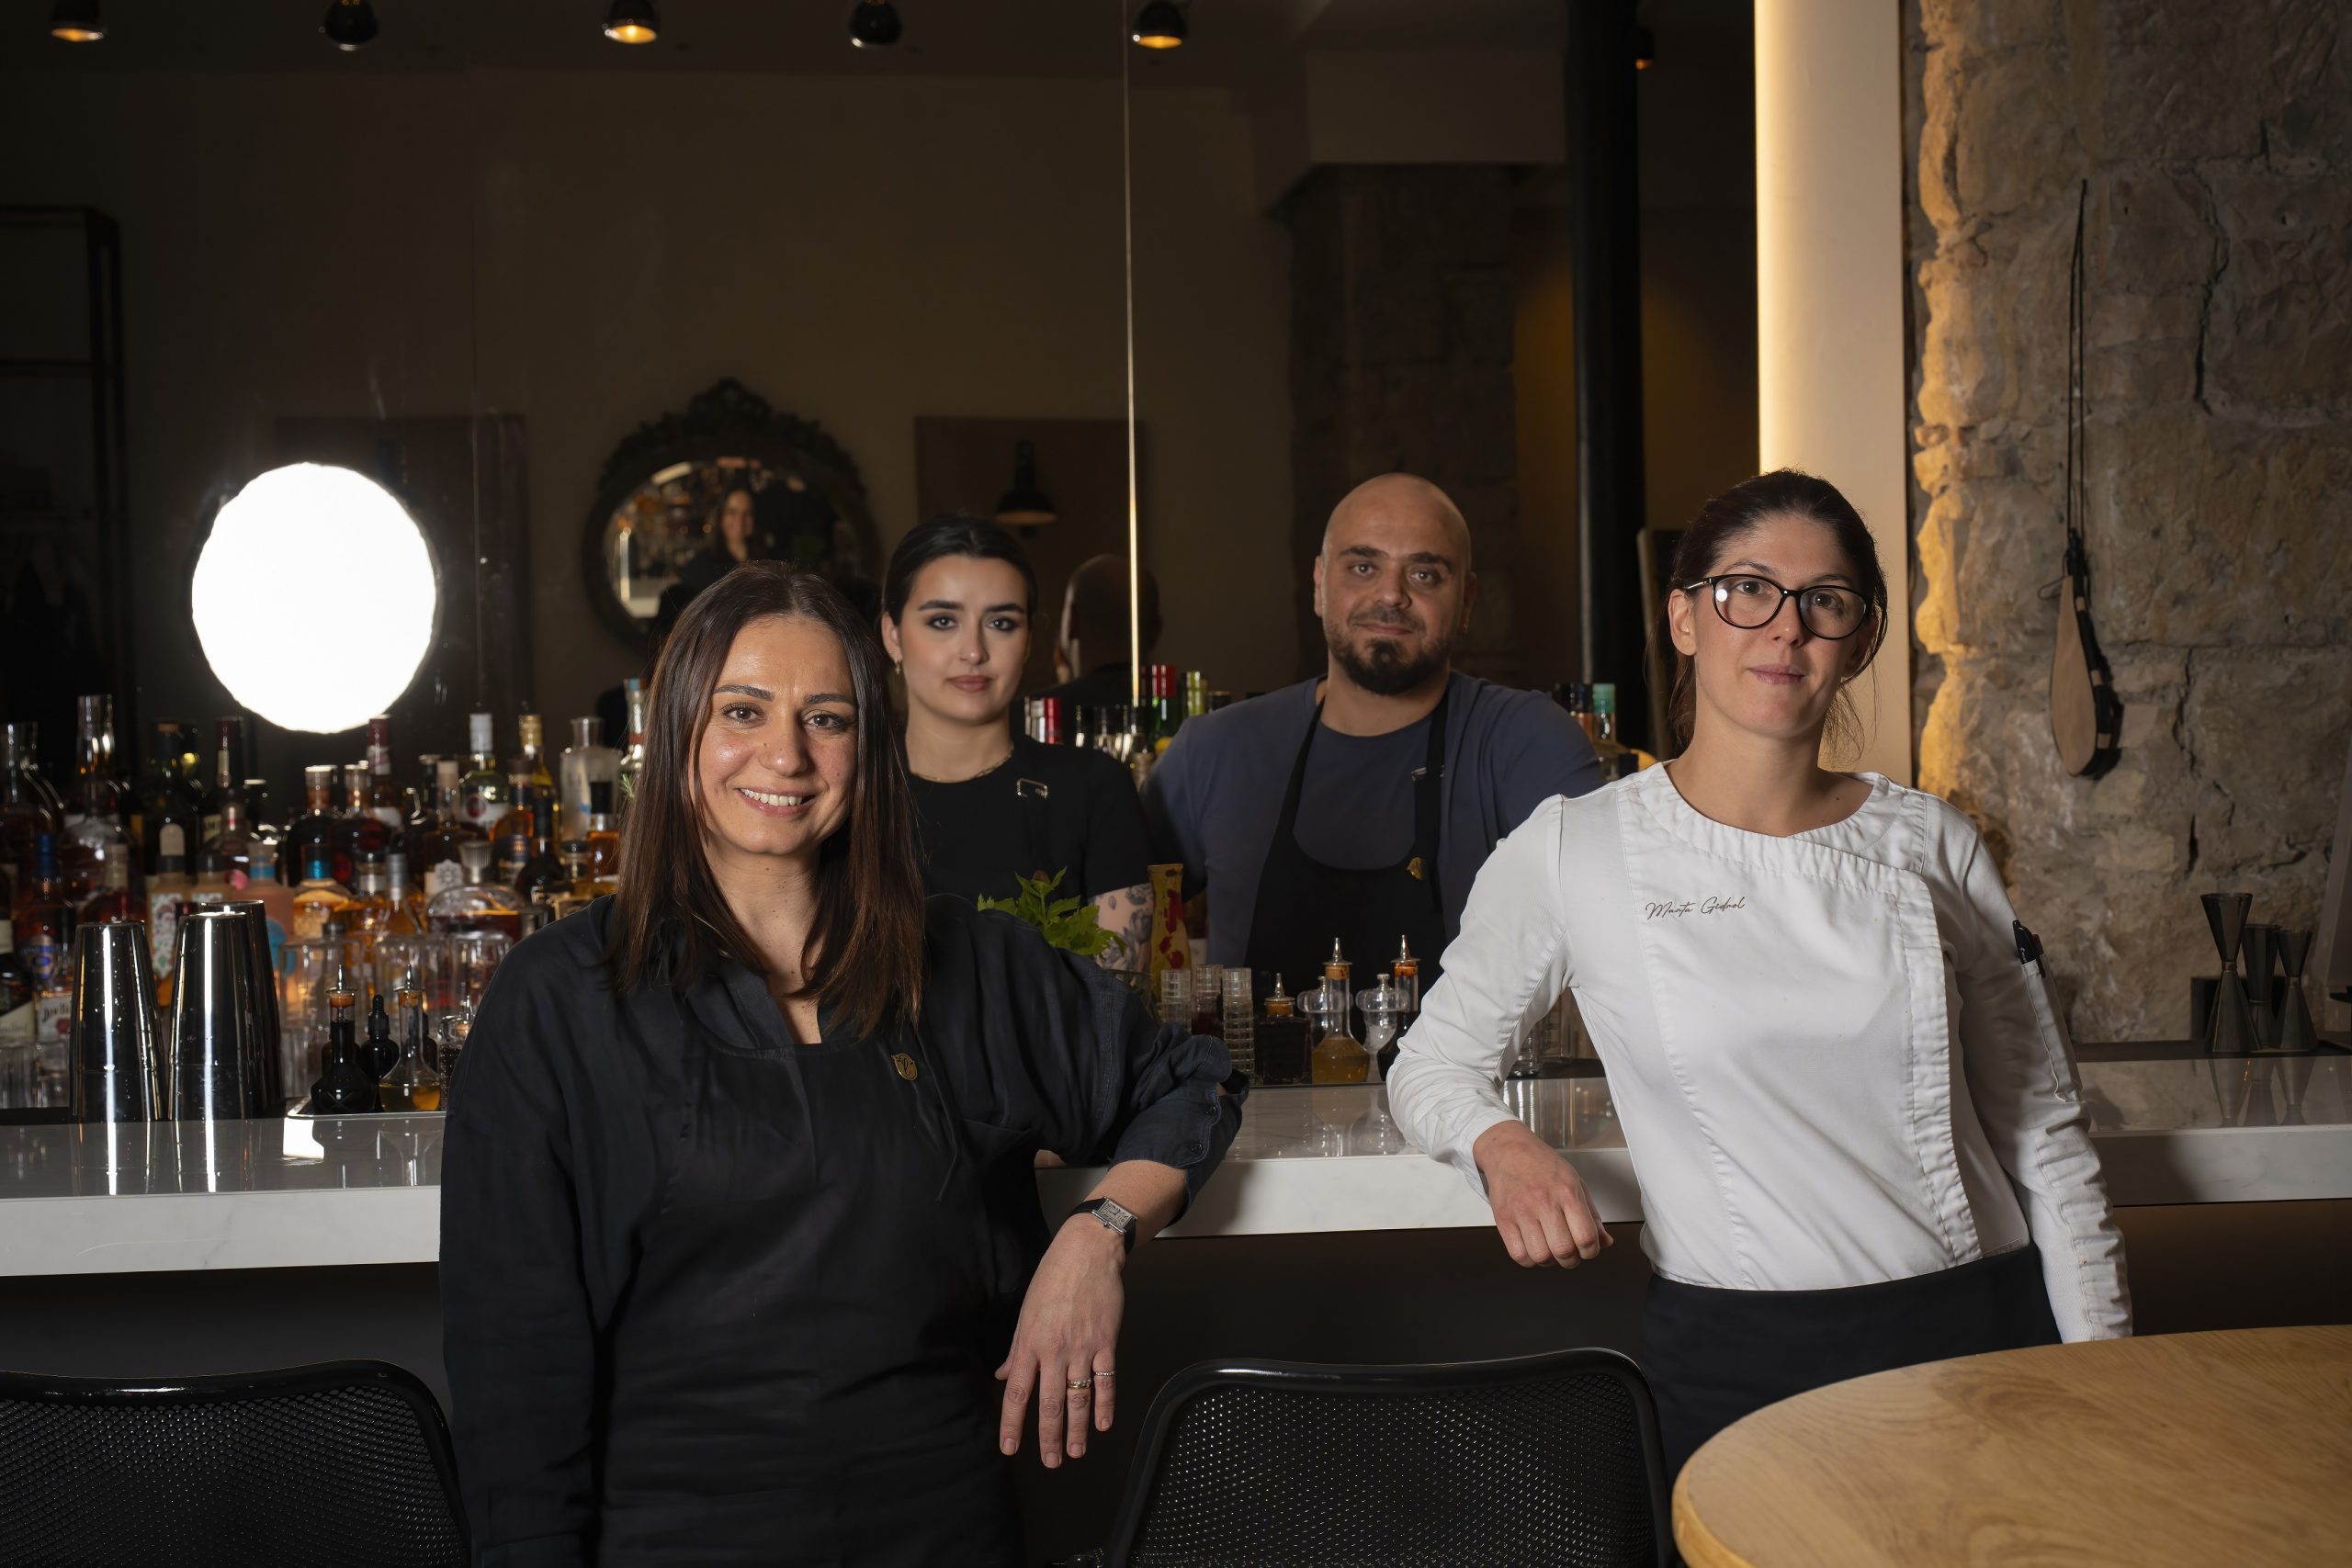 A new family affair with Walid Merhi, co-founder of L’ Antidote Restaurant in Nice, France